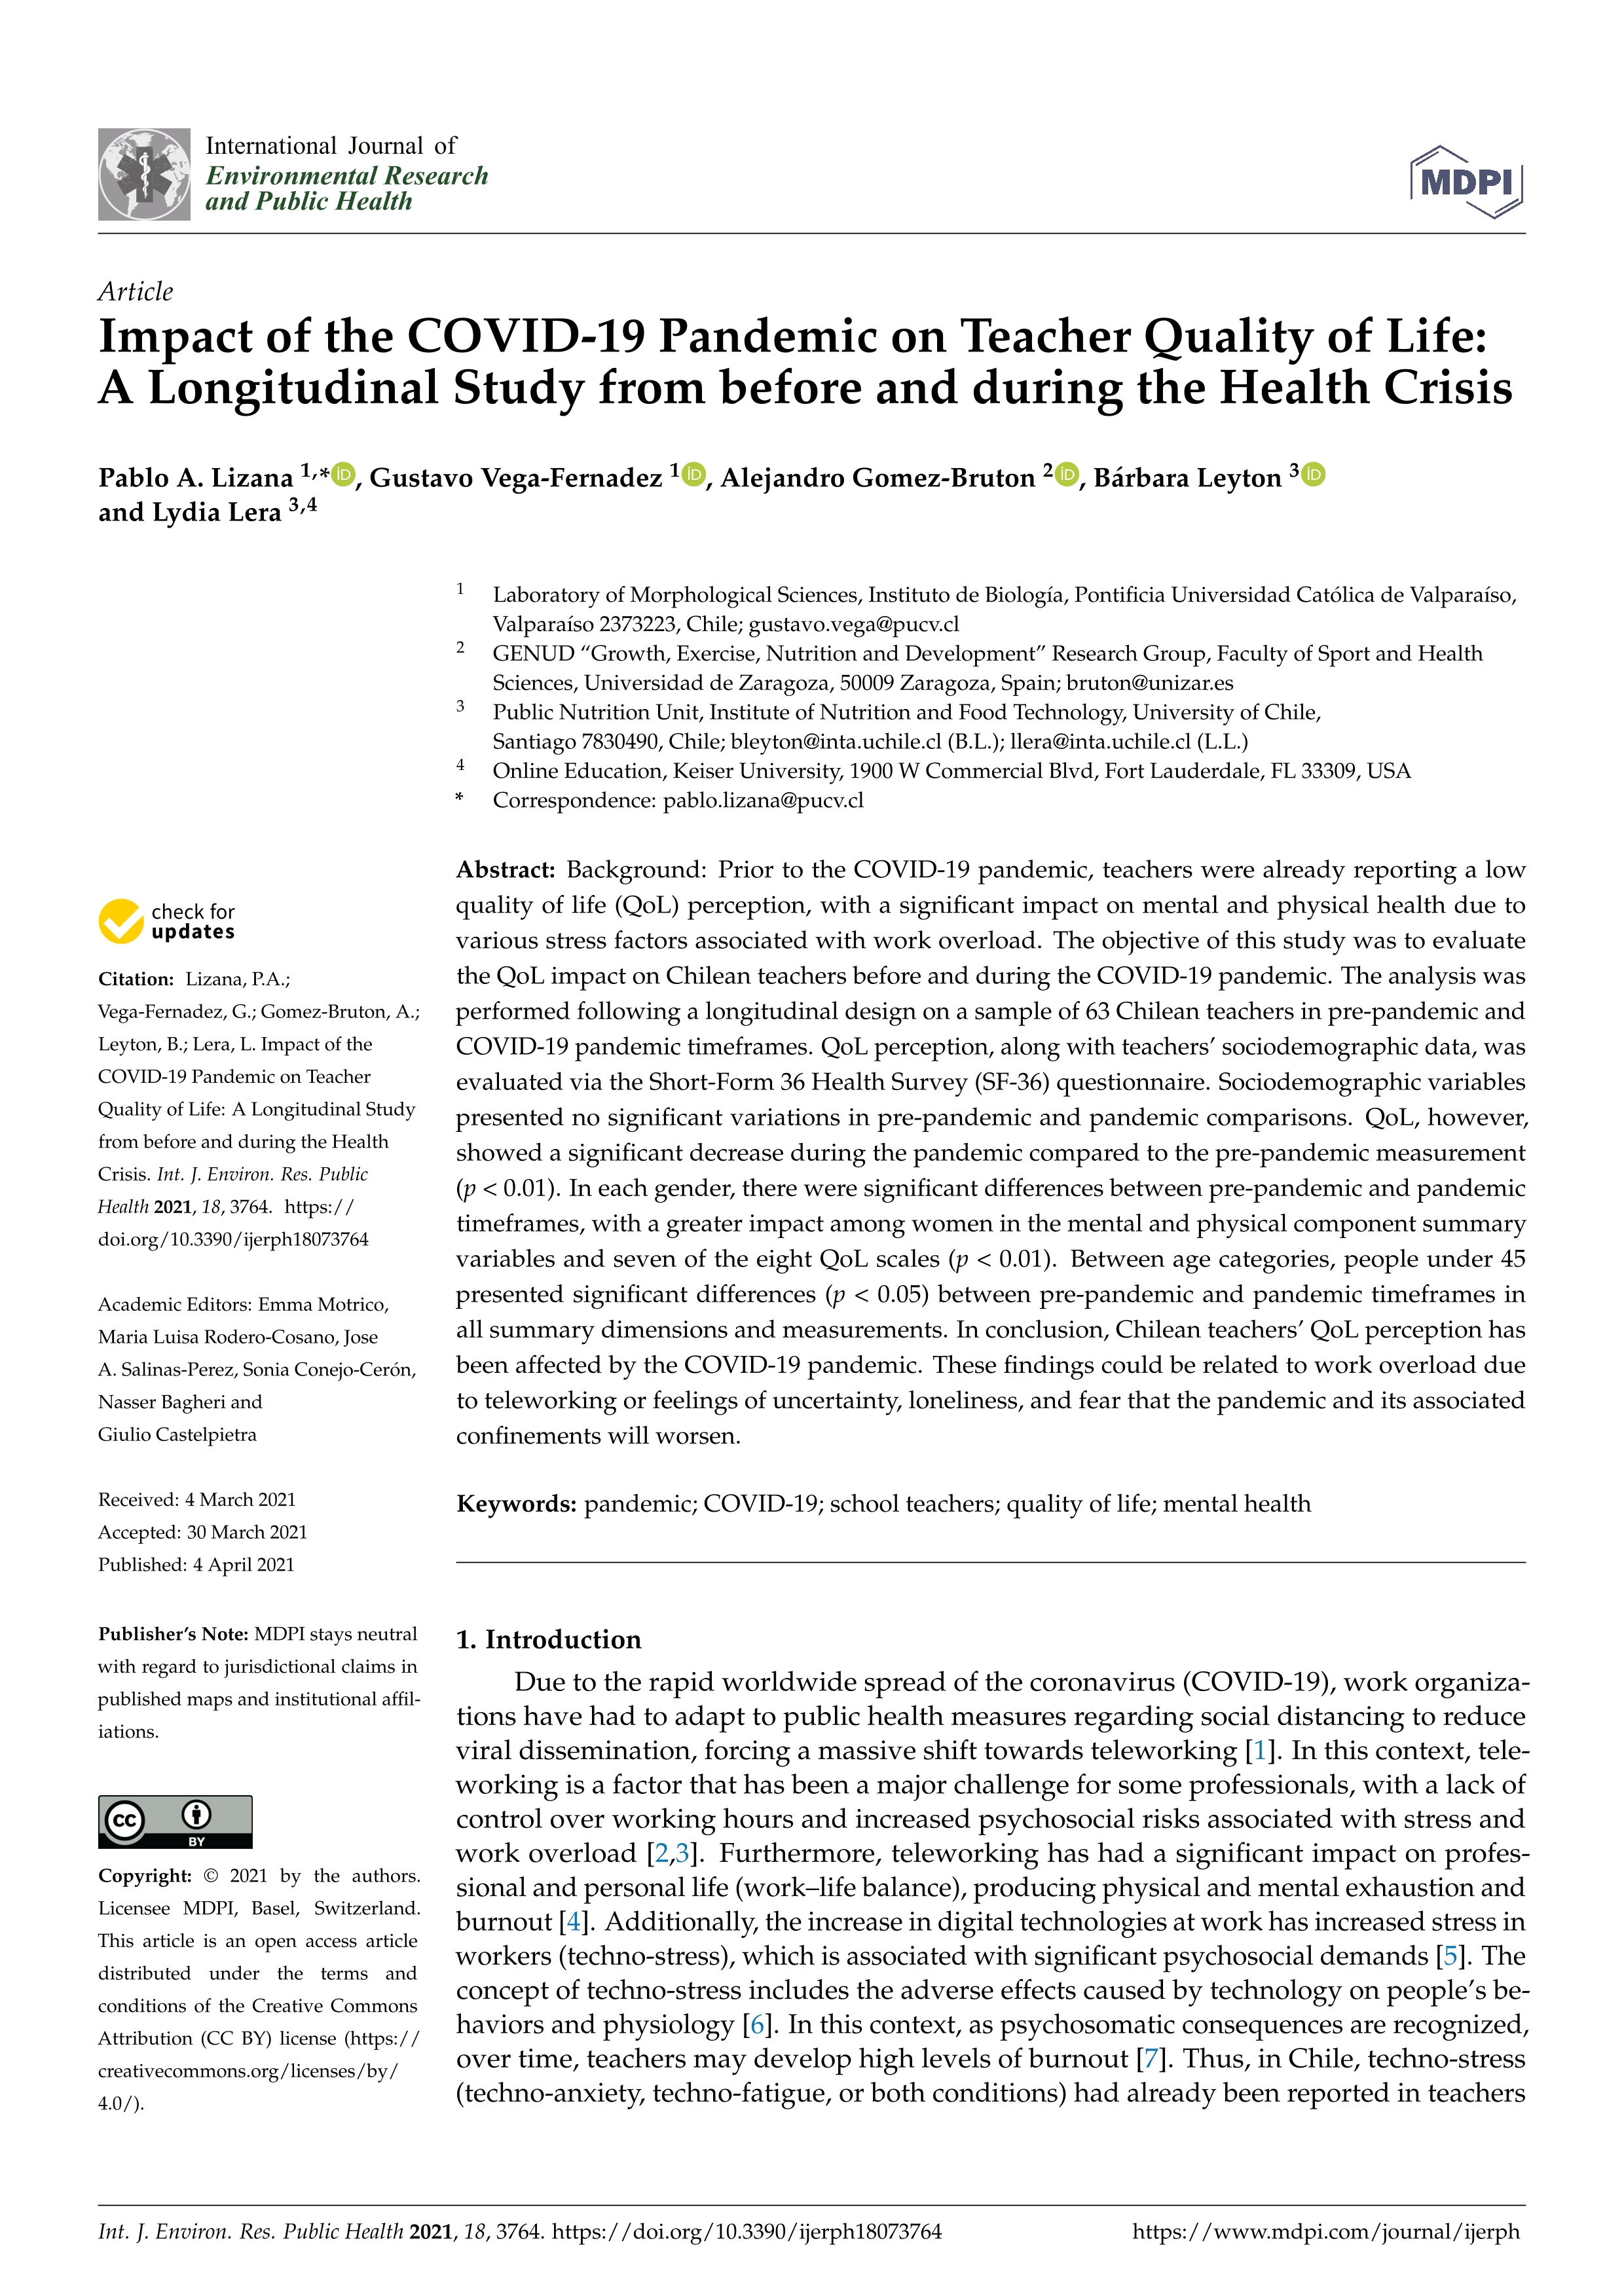 Impact of the covid-19 pandemic on teacher quality of life: A longitudinal study from before and during the health crisis